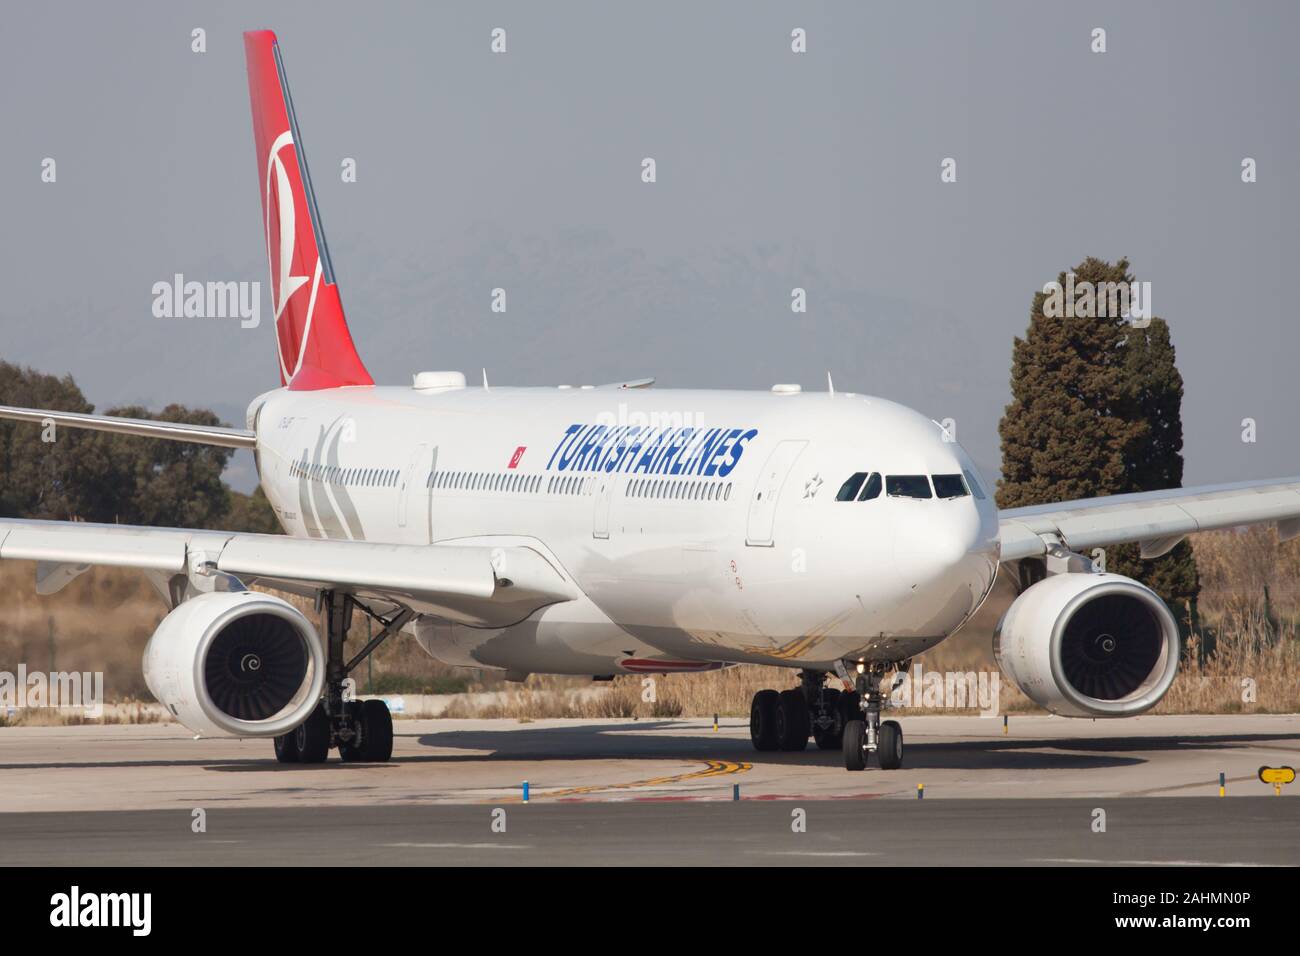 Barcelona, Spain - February 24, 2019: Turkish Airlines Airbus A330-300 on the taxiway at El Prat Airport in Barcelona, Spain. Stock Photo